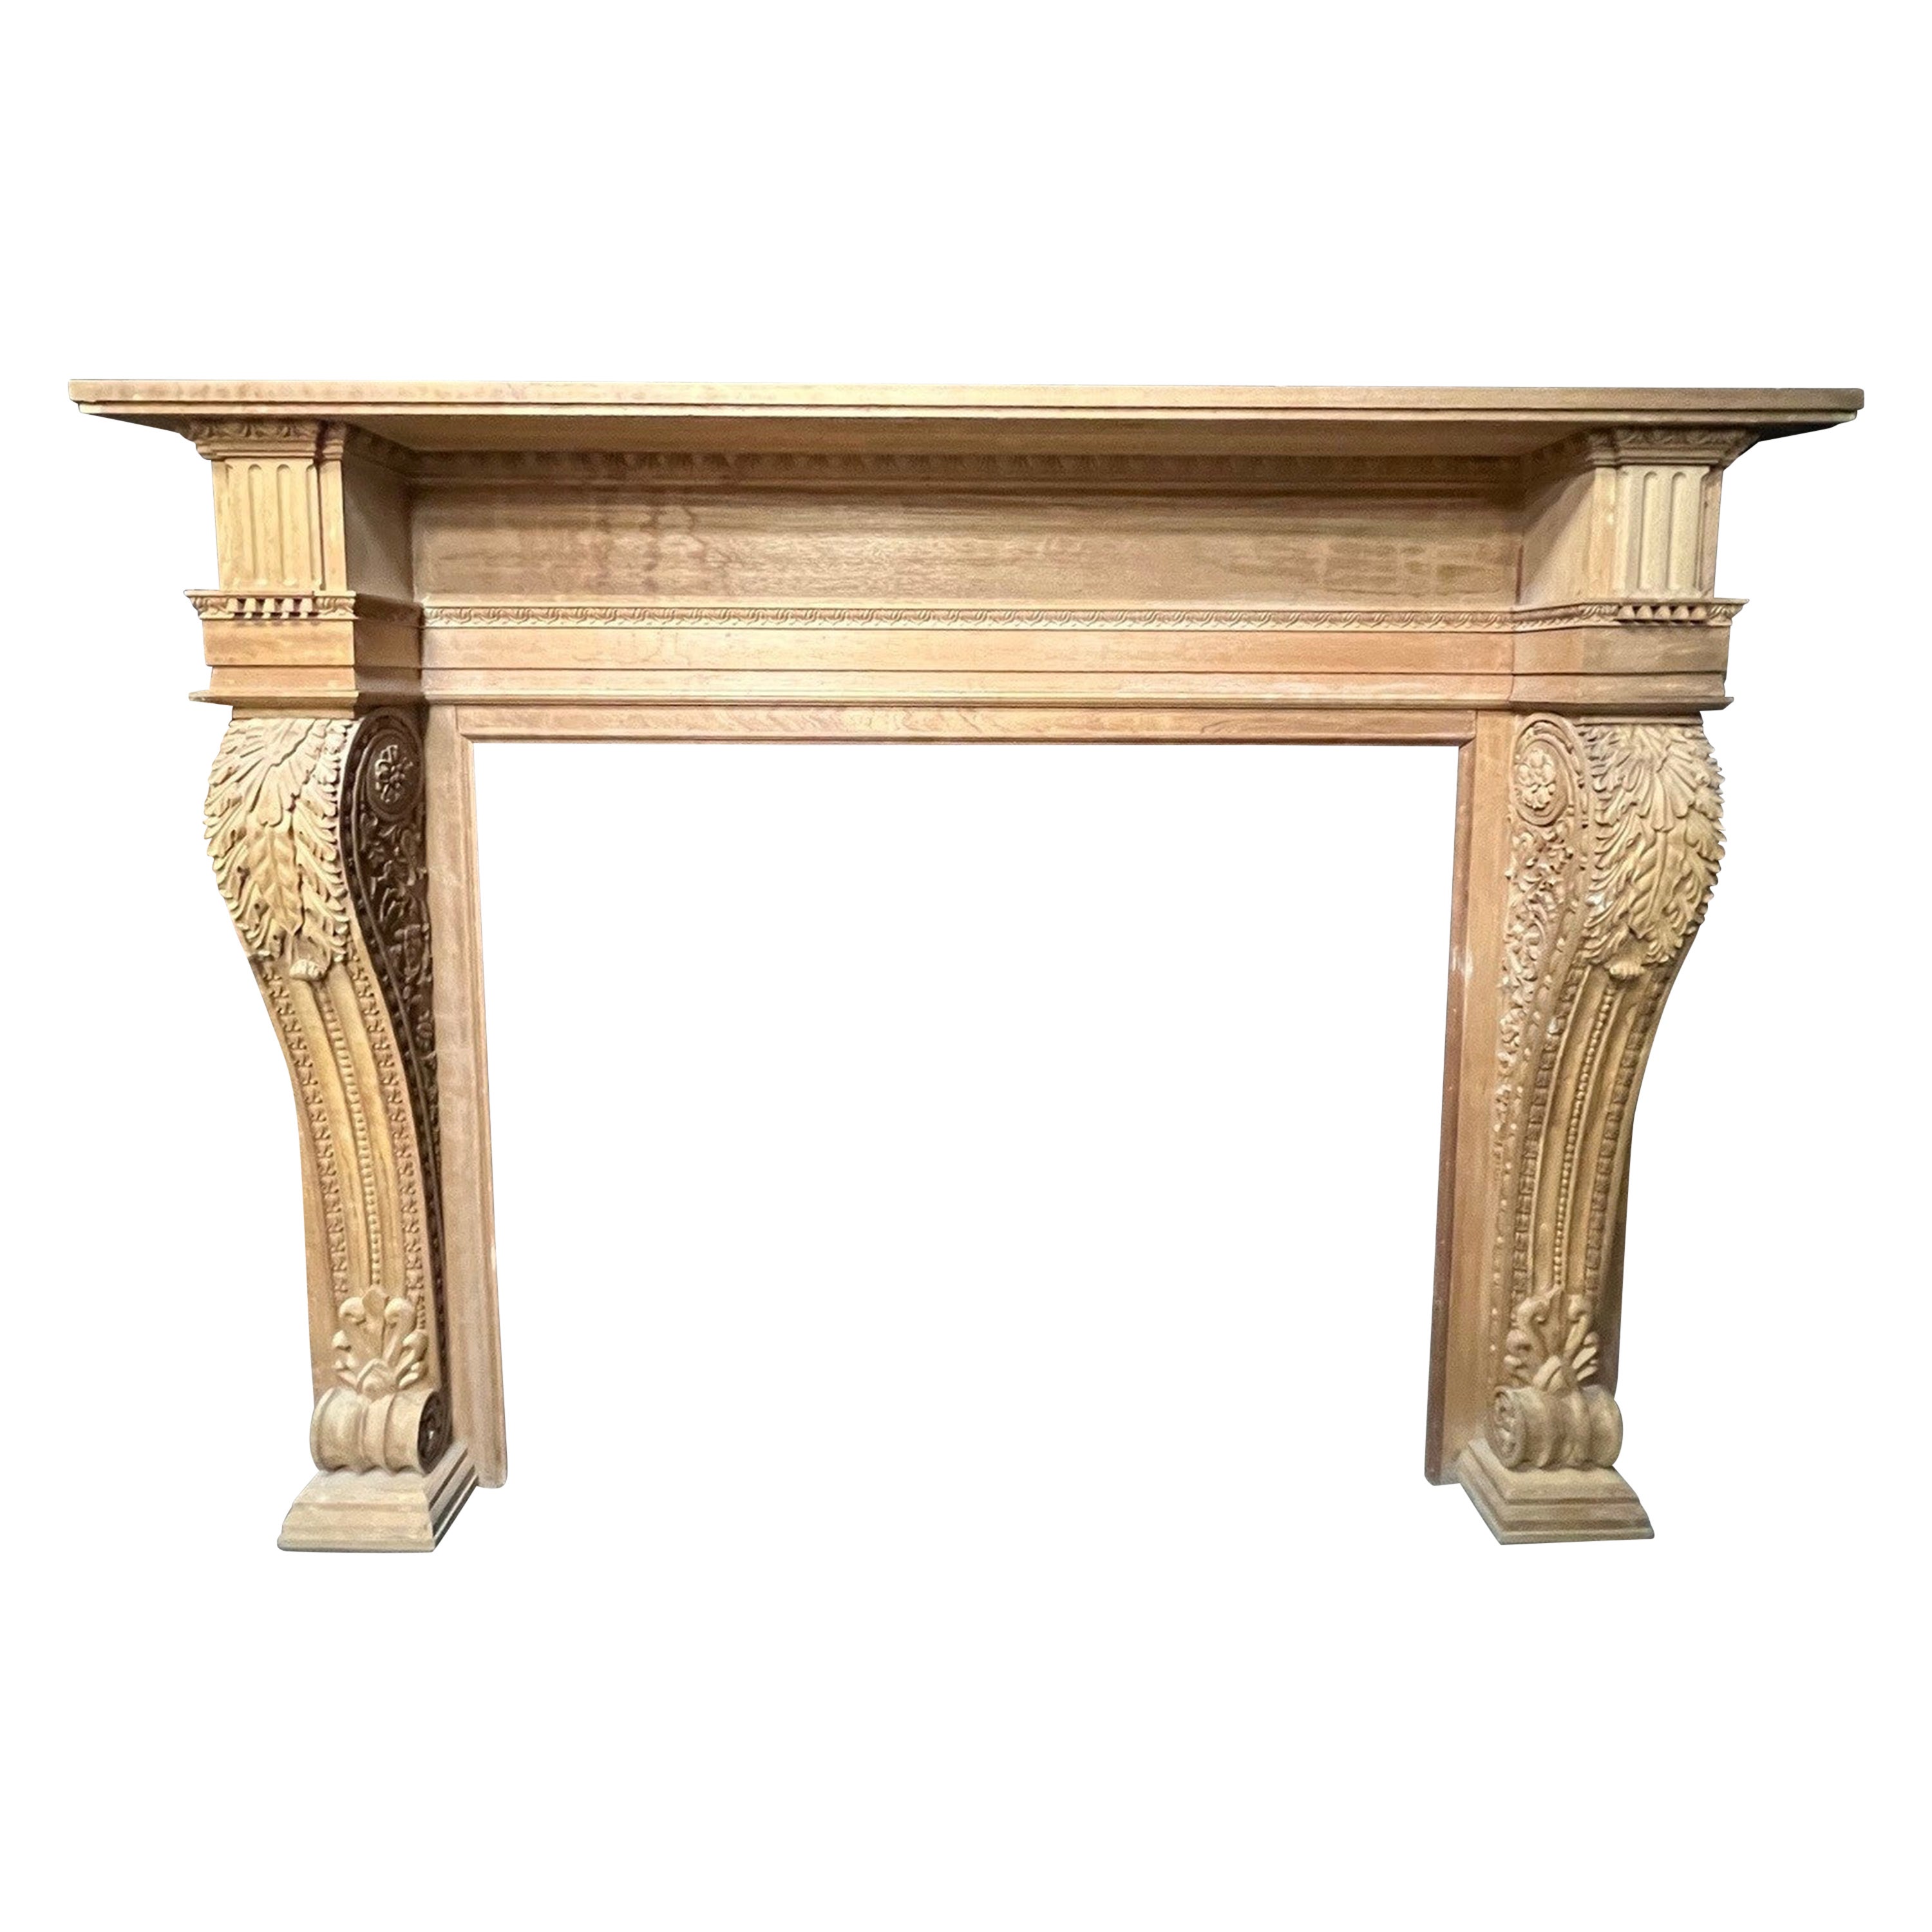 Oversize Carved Wood Fireplace Mantel with Acanthus Leaf Corbels.   For Sale